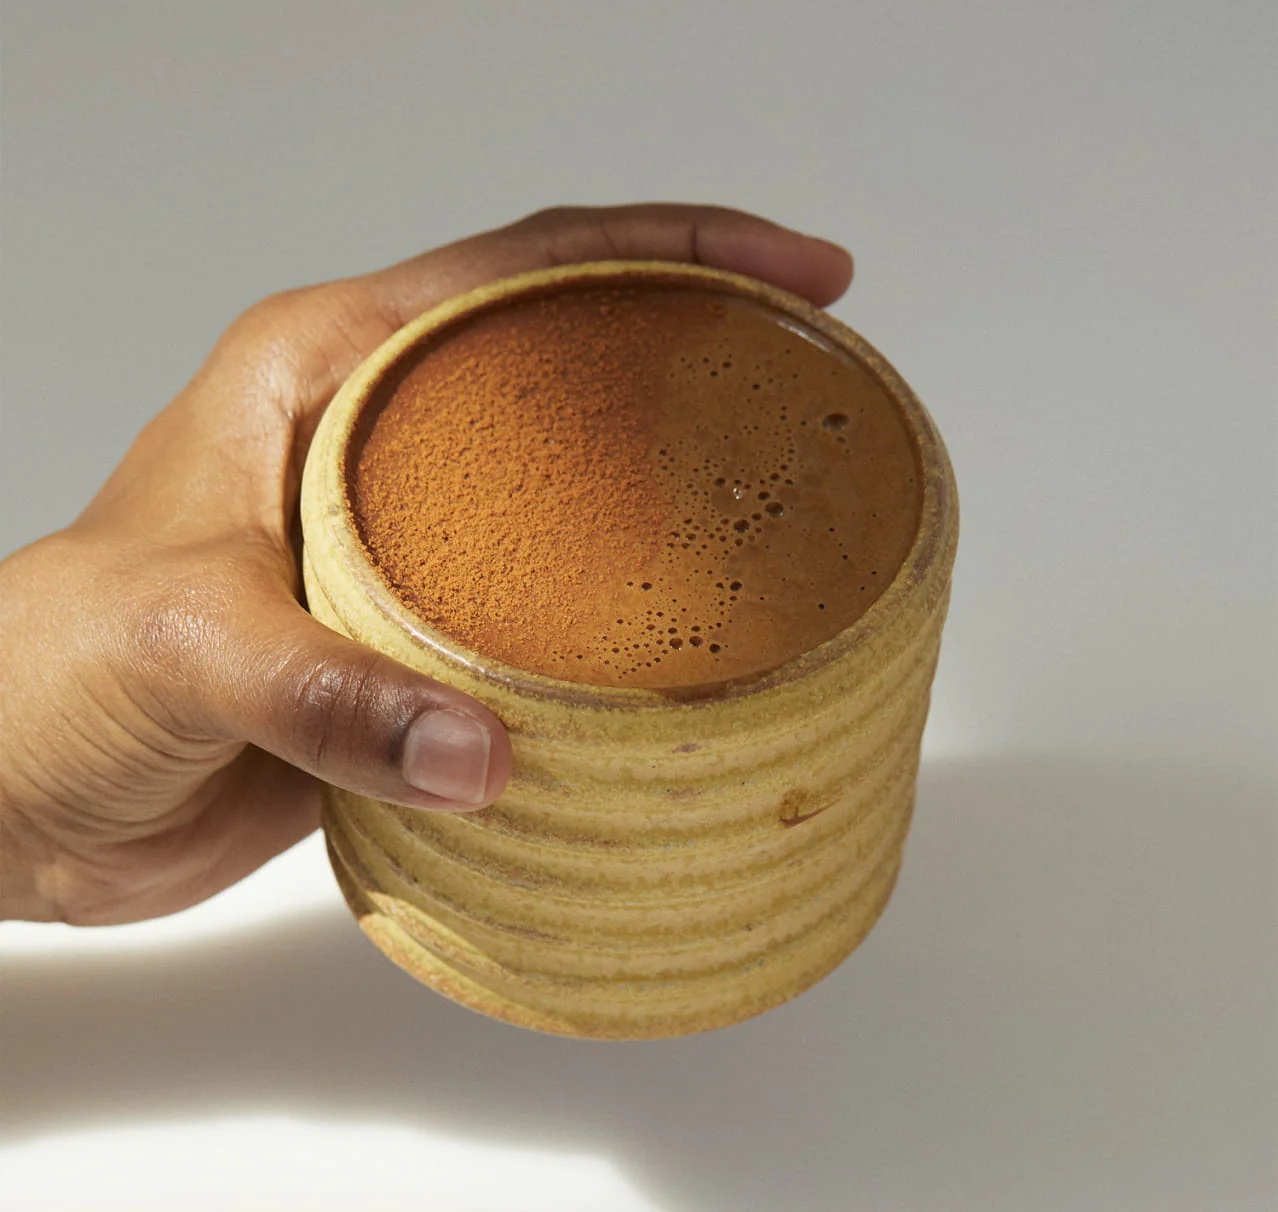 A close up of a hand holding a ceramic mug with brown liquid in it.